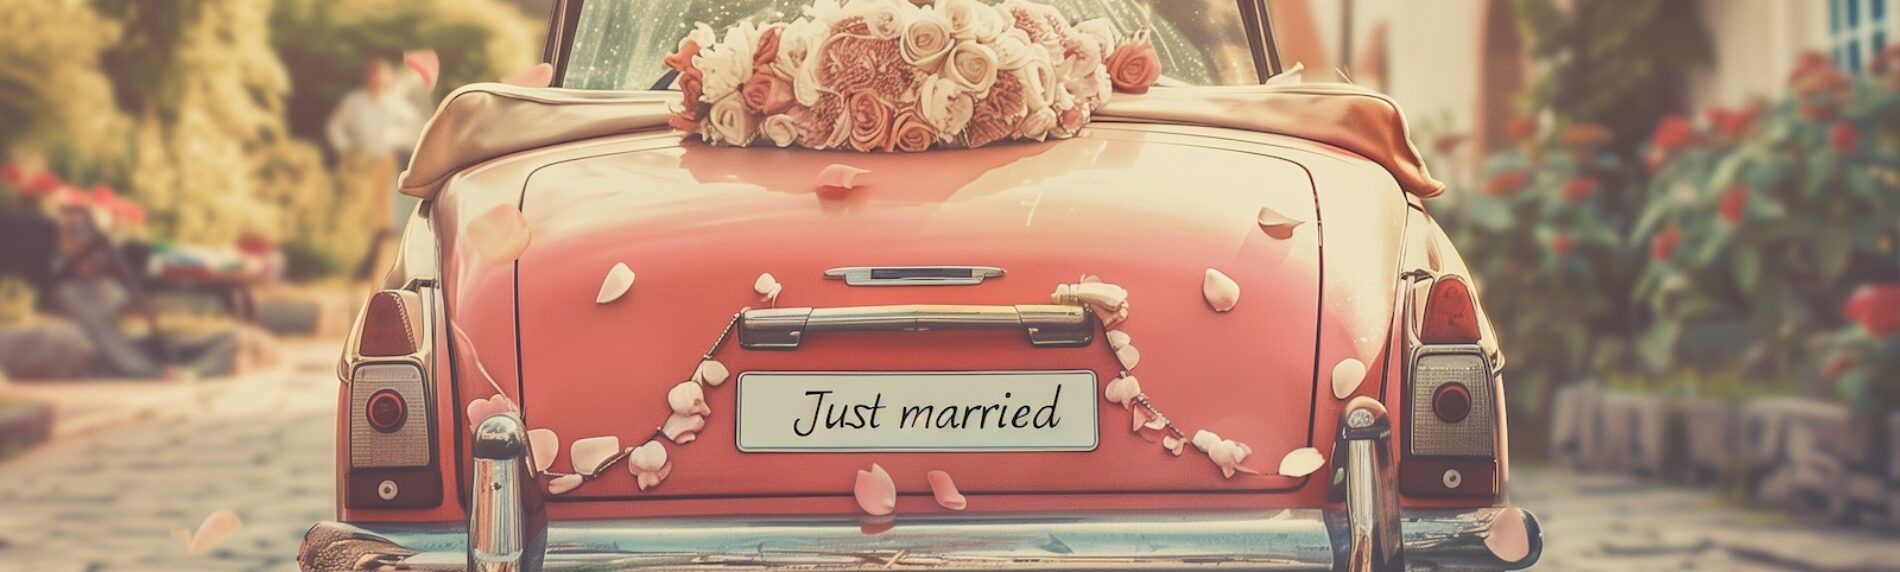 5 Iconic Classic Cars For Your Wedding Send Off